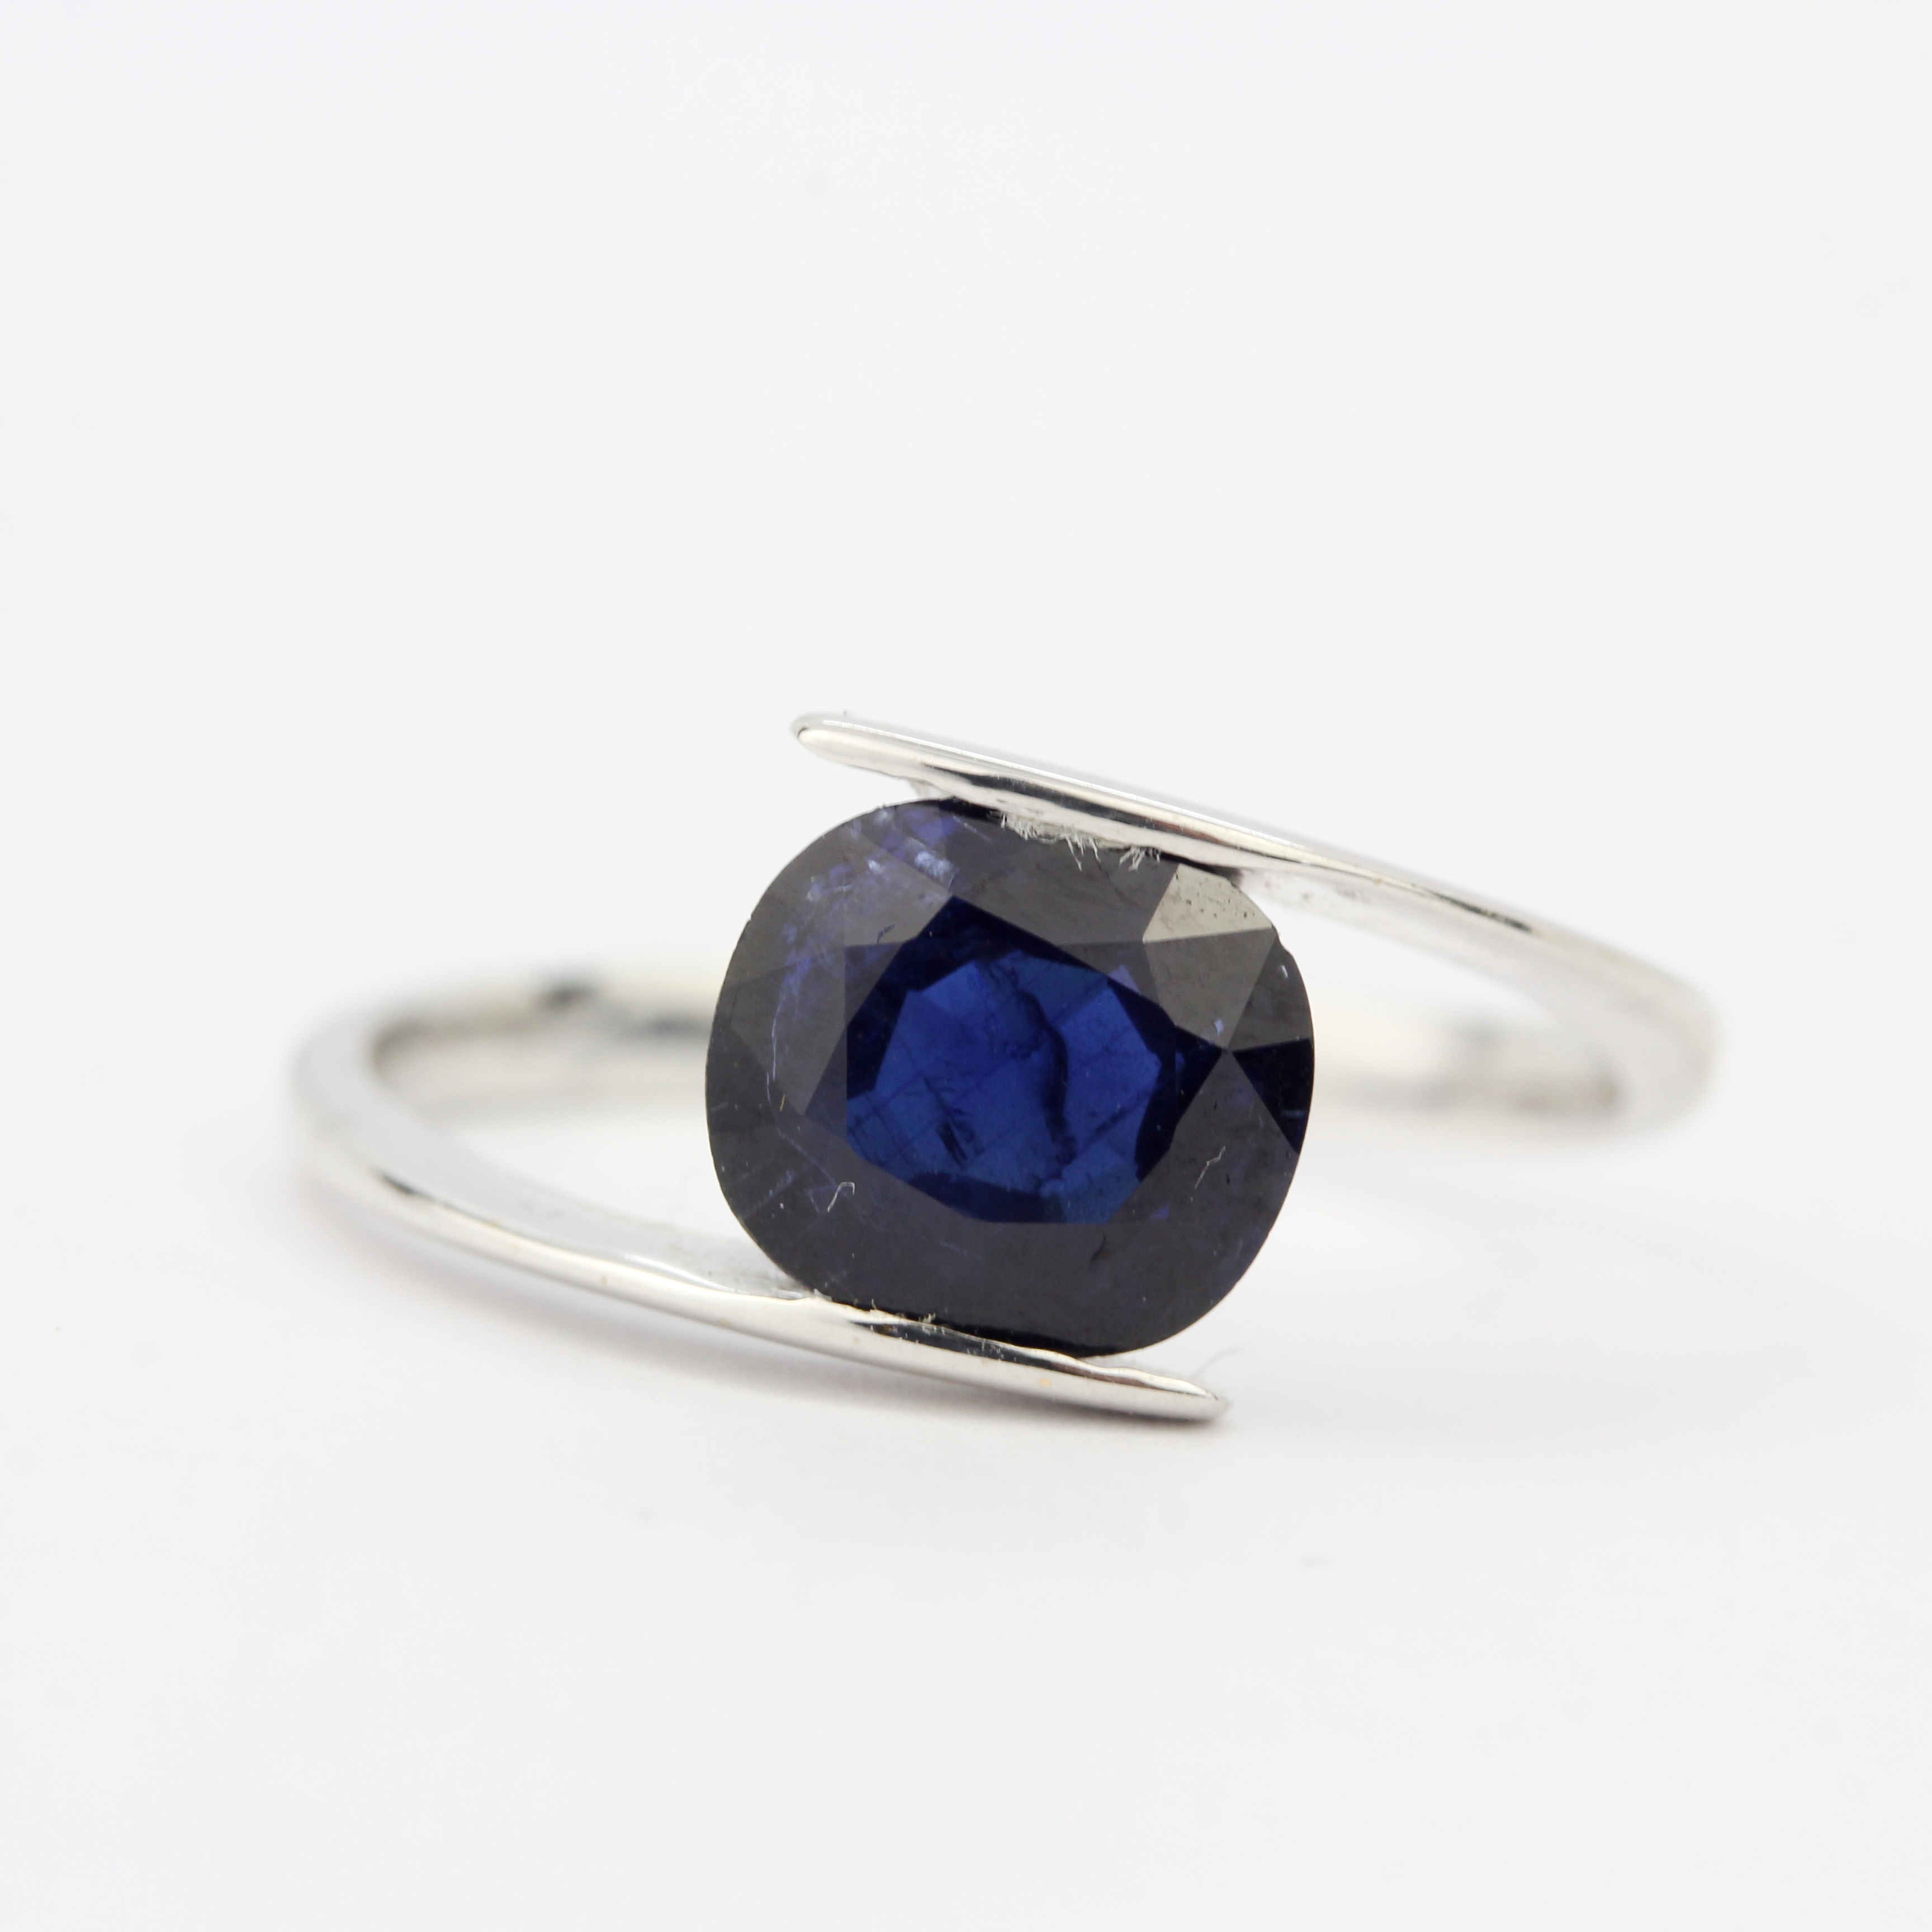 An 18ct white gold (tested) ring set with a 1.9ct cushion cut royal blue sapphire, ring size L.